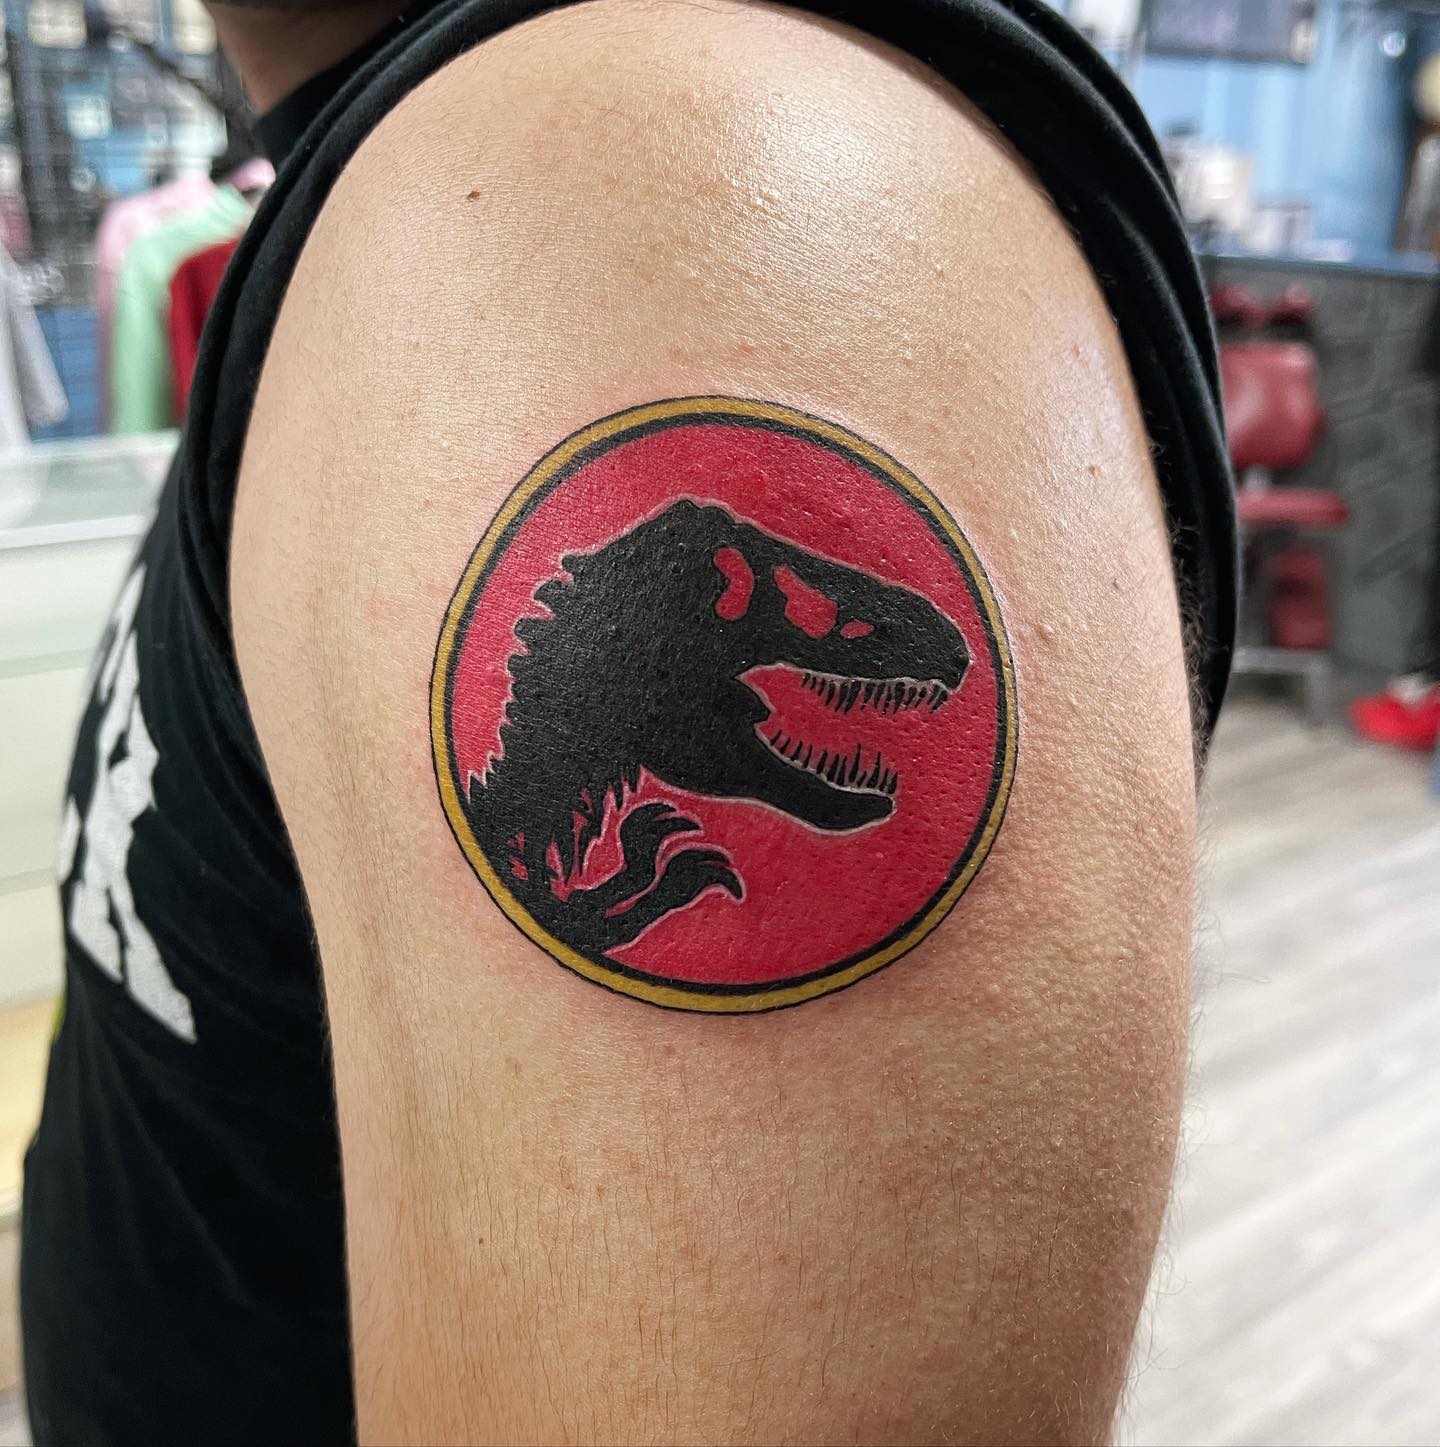 If Jurassic World or Jurassic Park is one of your favorite movies give it a go with this black and red shoulder tattoo.